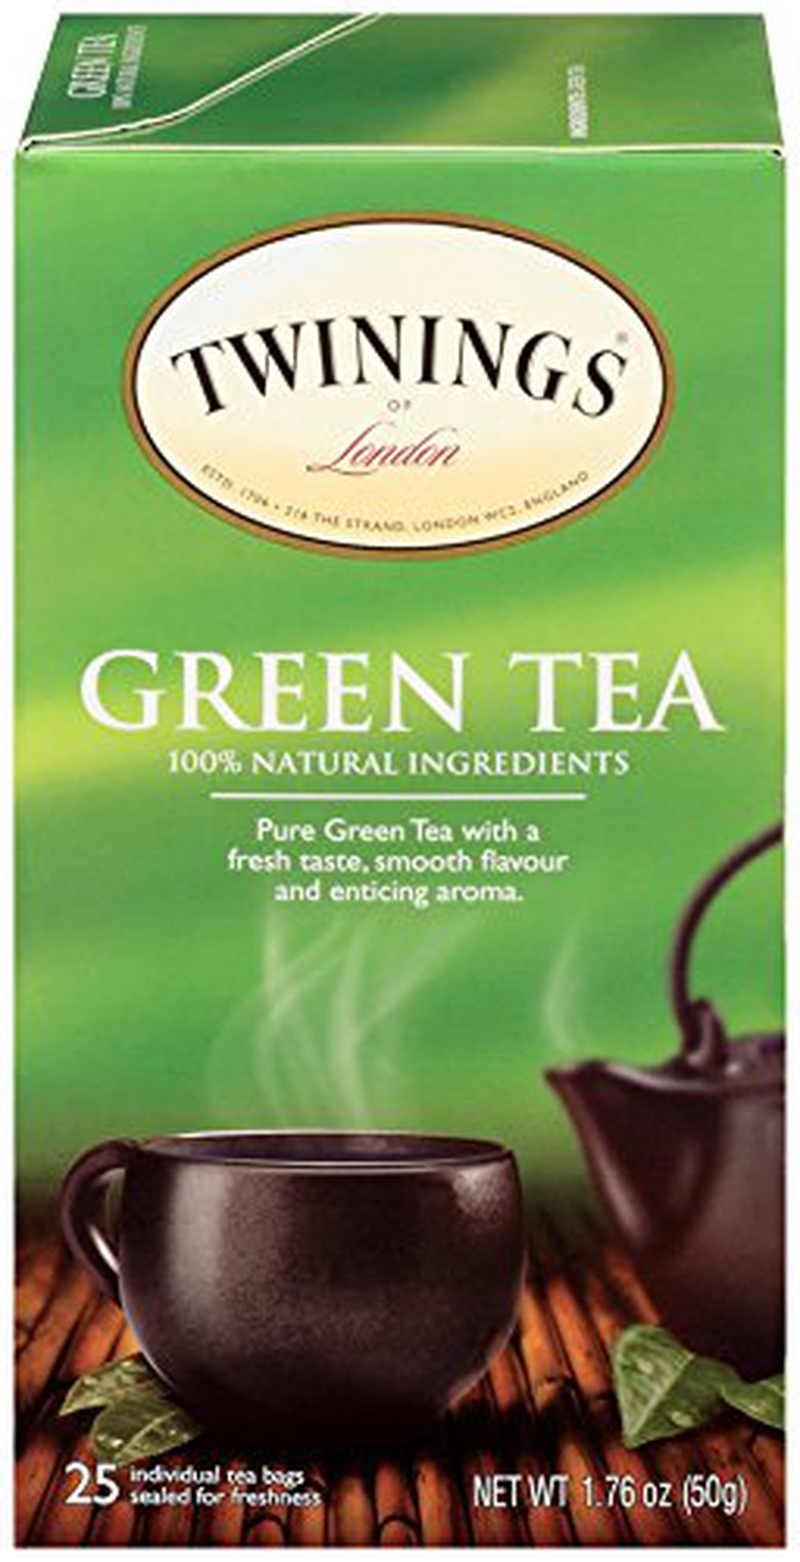 Twinings of London Pure Green Tea Bags, 25 Count (Pack of 6)